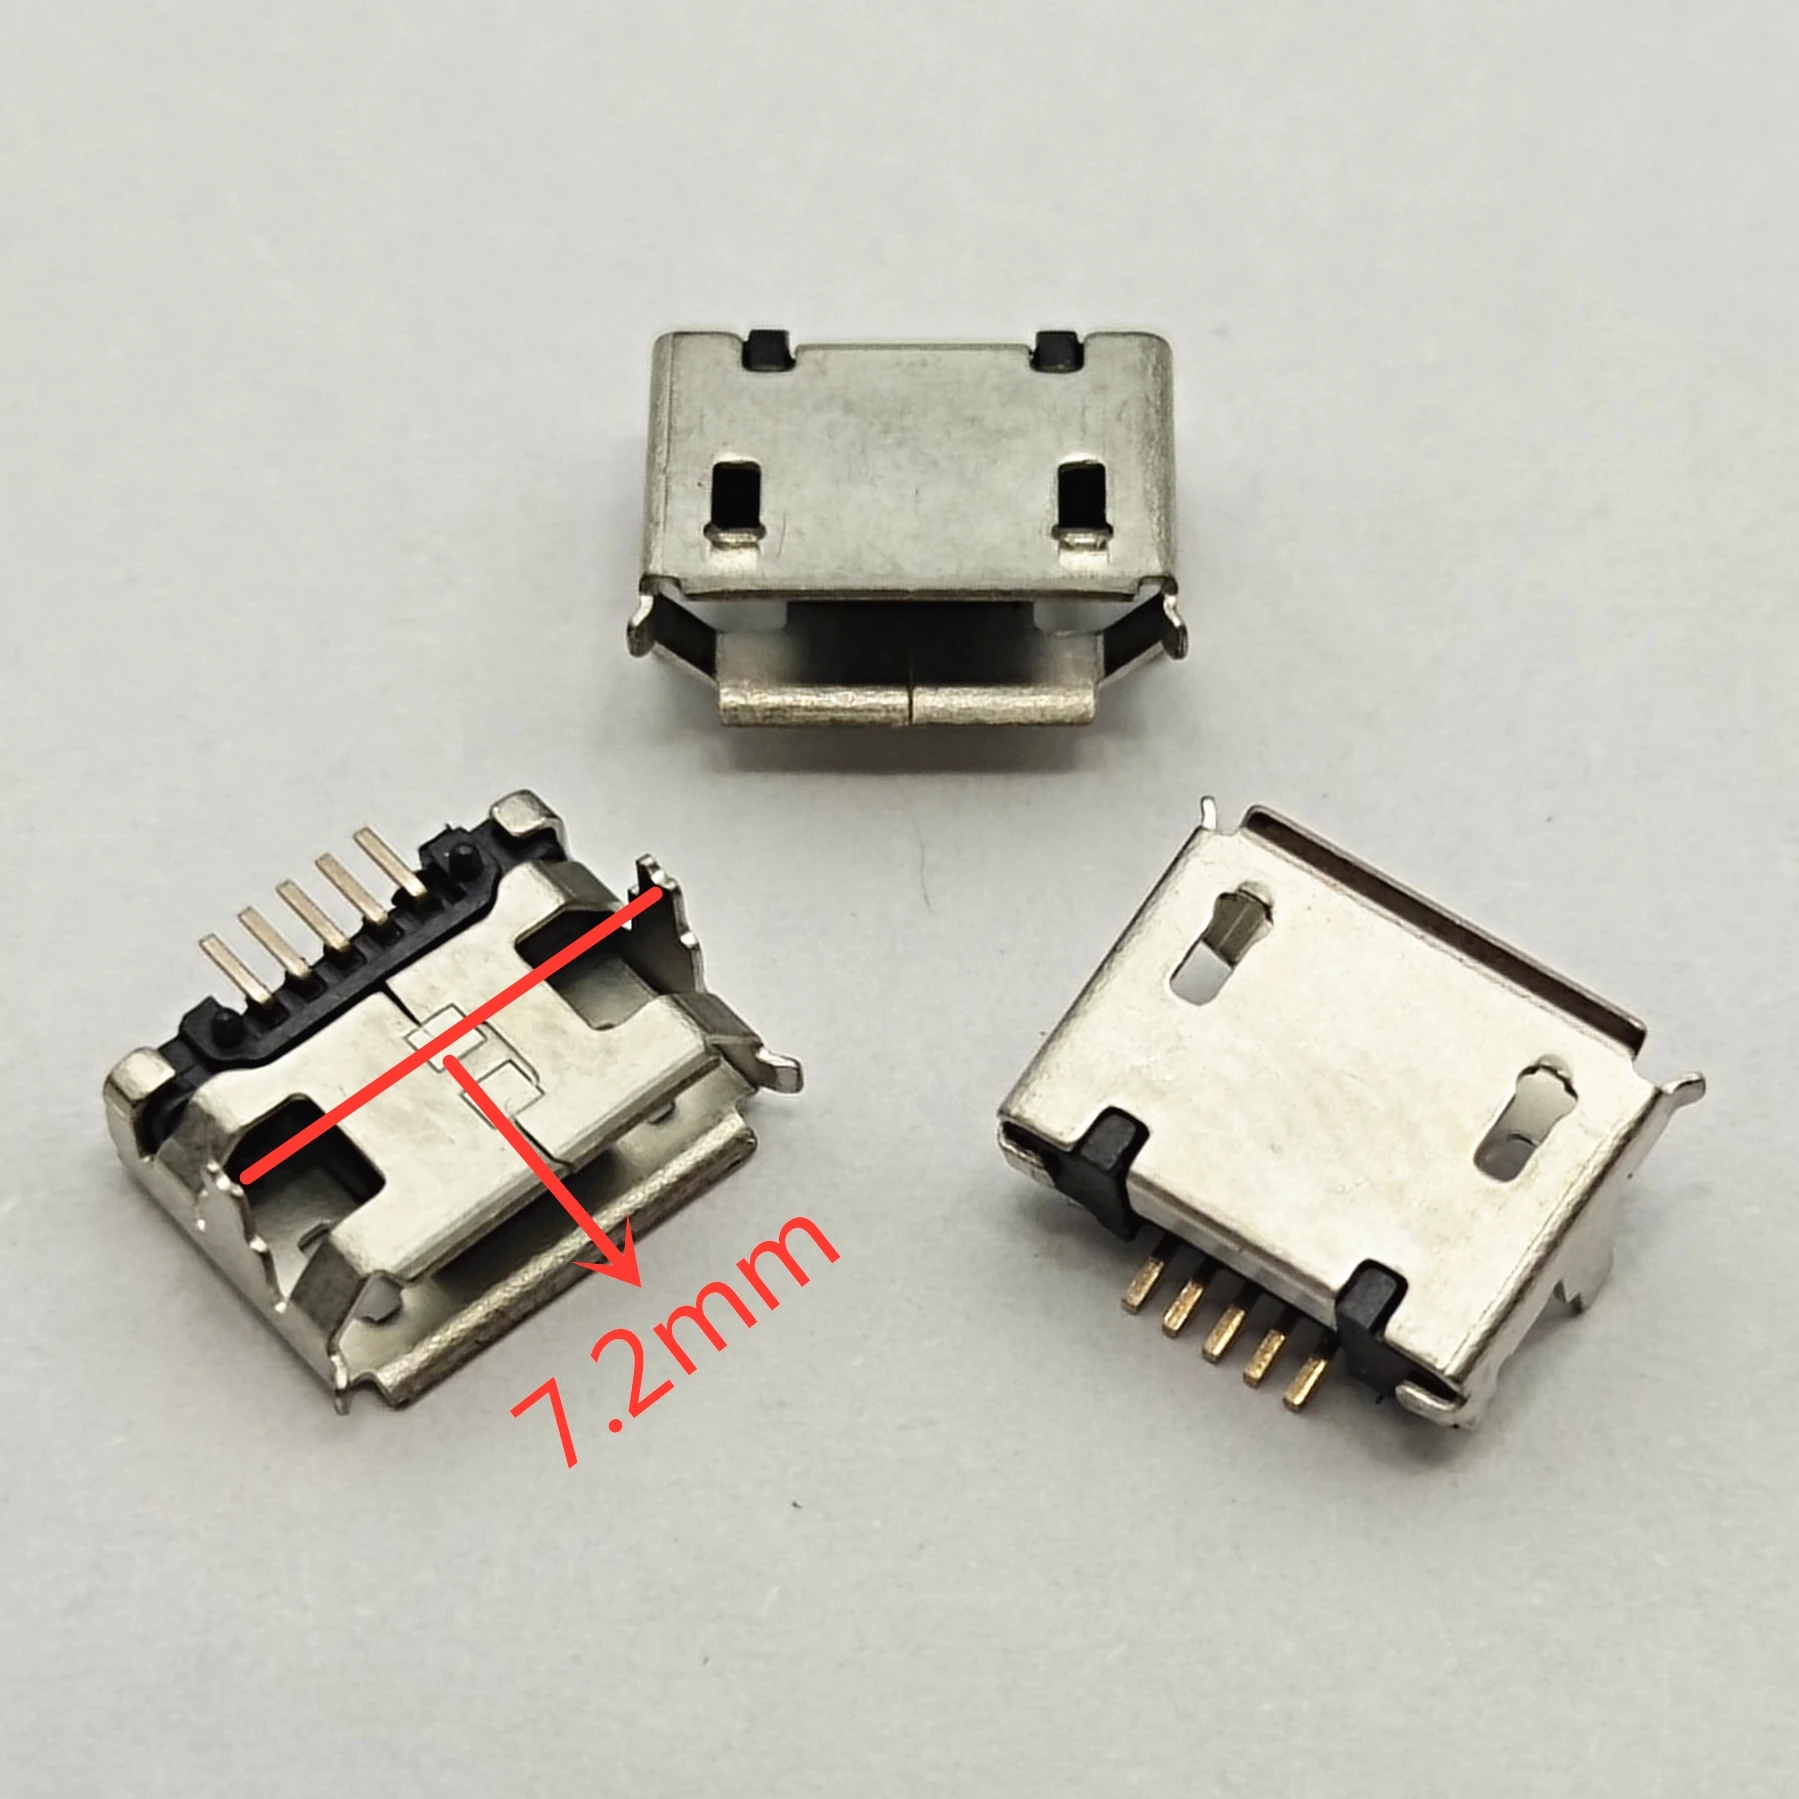 50pcs-72mm-micro-usb-mini-connector-5pin-curl-edge-short-needle-5p-dip2-data-port-charging-port-connector-for-mobile-end-plug